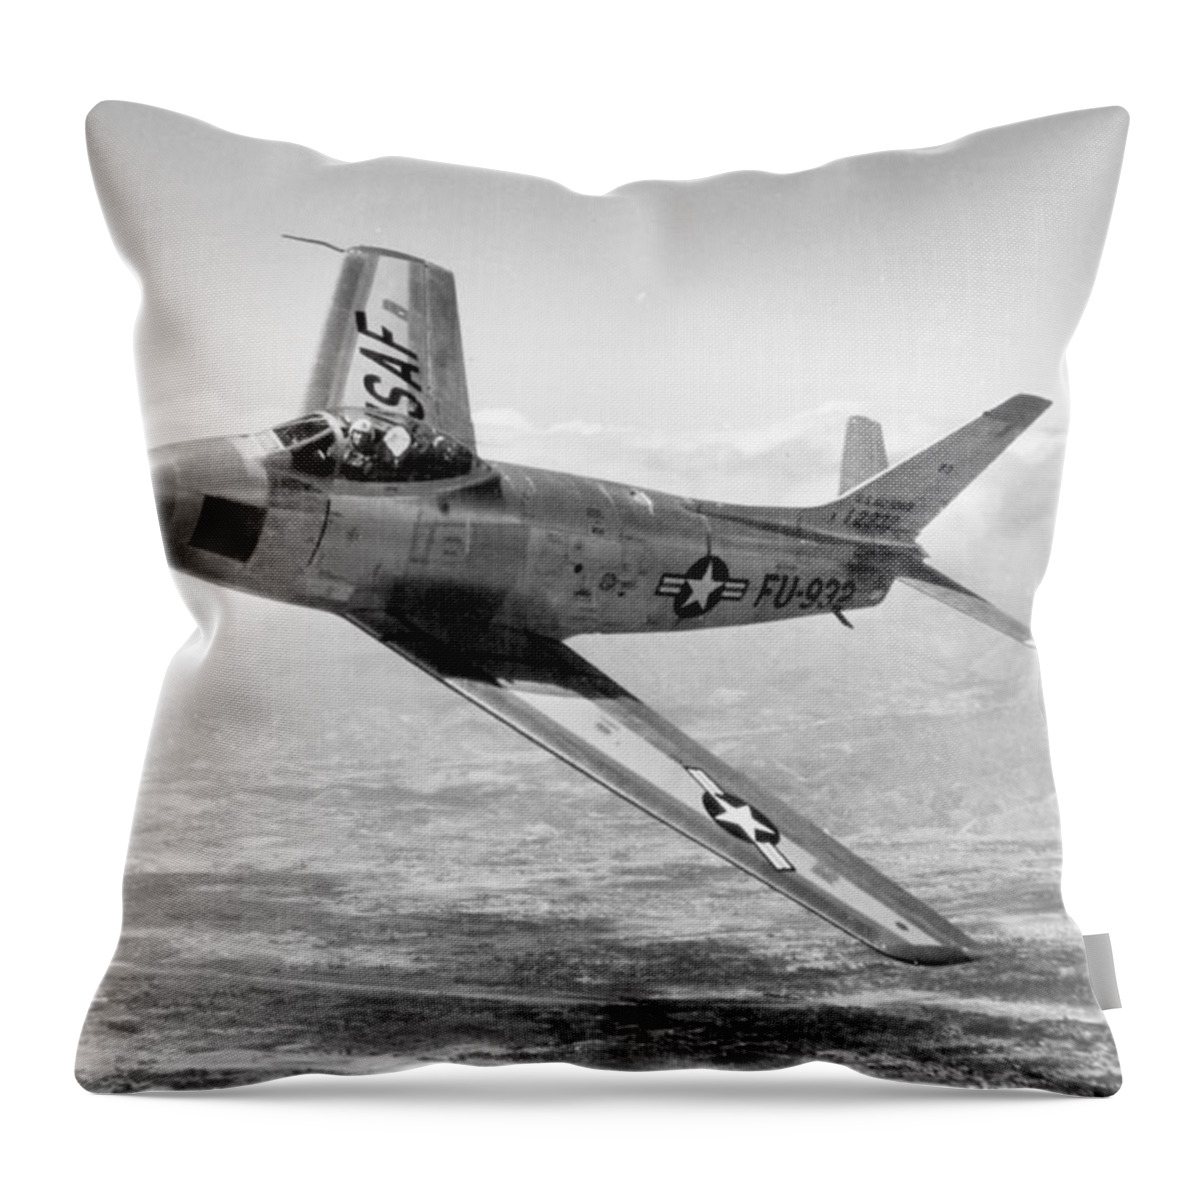 Science Throw Pillow featuring the photograph F-86 Sabre, First Swept-wing Fighter by Science Source